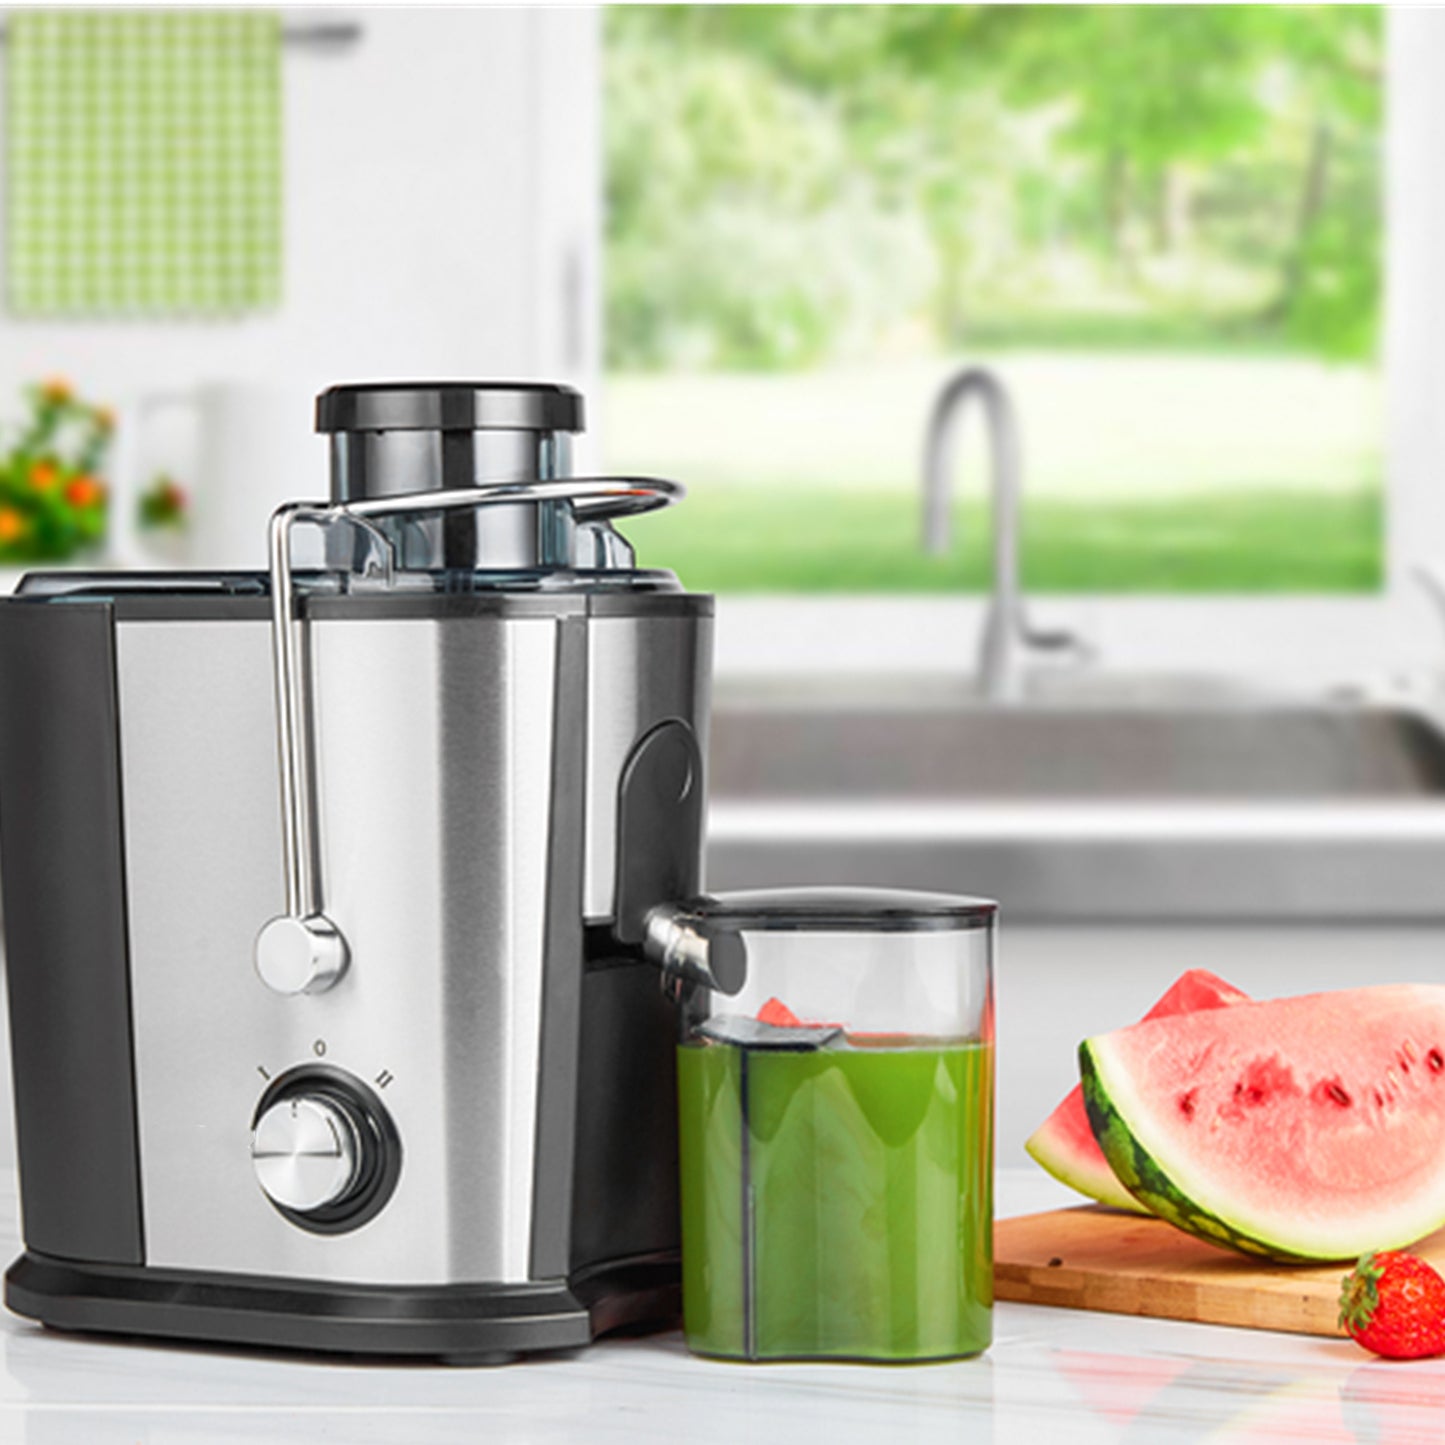 Juilsit Juicer Easy to Clean, 3 " Juice Extractor BPA Free Compact Fruits & Vegetables Juicer, Dual Speed Centrifugal Juicer with Non-Drip Function, Stainless Steel Juicers